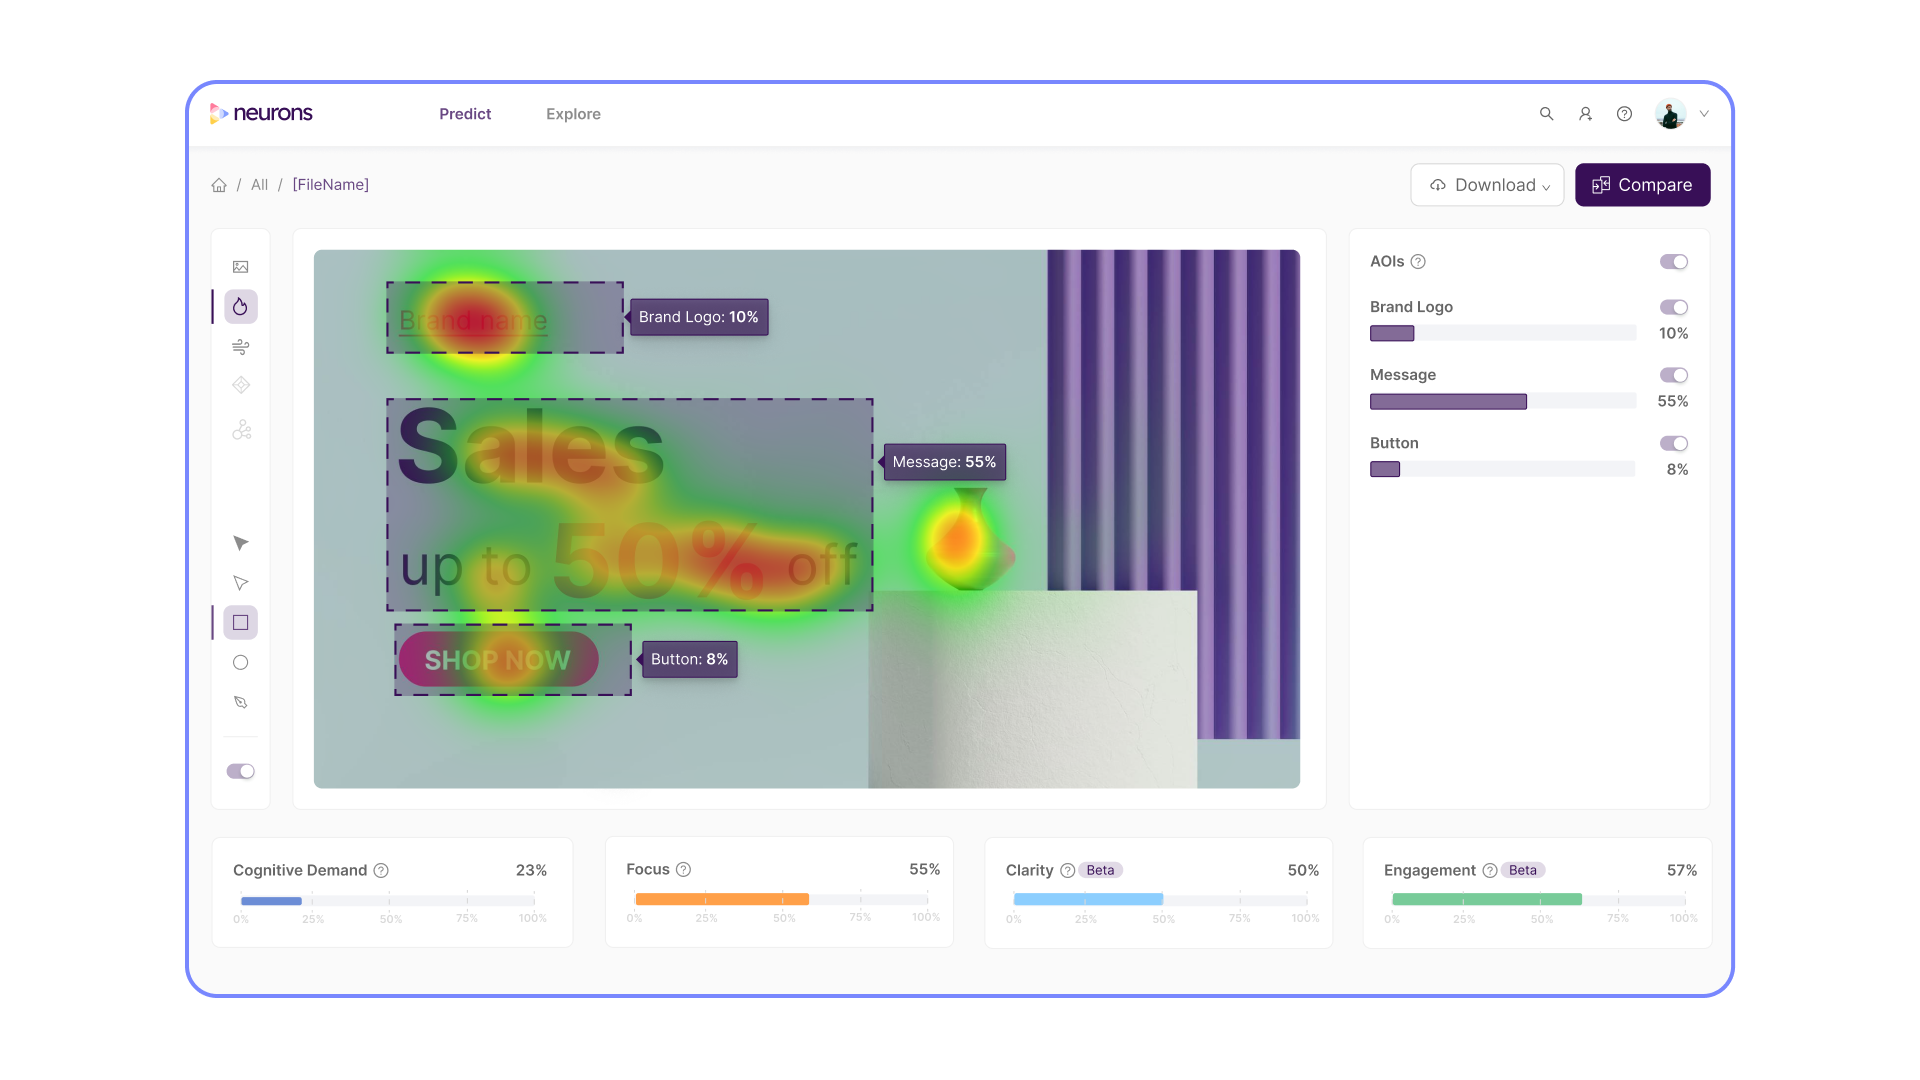 Predict provides you with attention heatmaps instantly: images take seconds to analyze and videos take minutes. Additionally, you will get scores on Cognitive Demand, Focus, Clarity, and Engagement to help you optimize your creatives for peak performance.